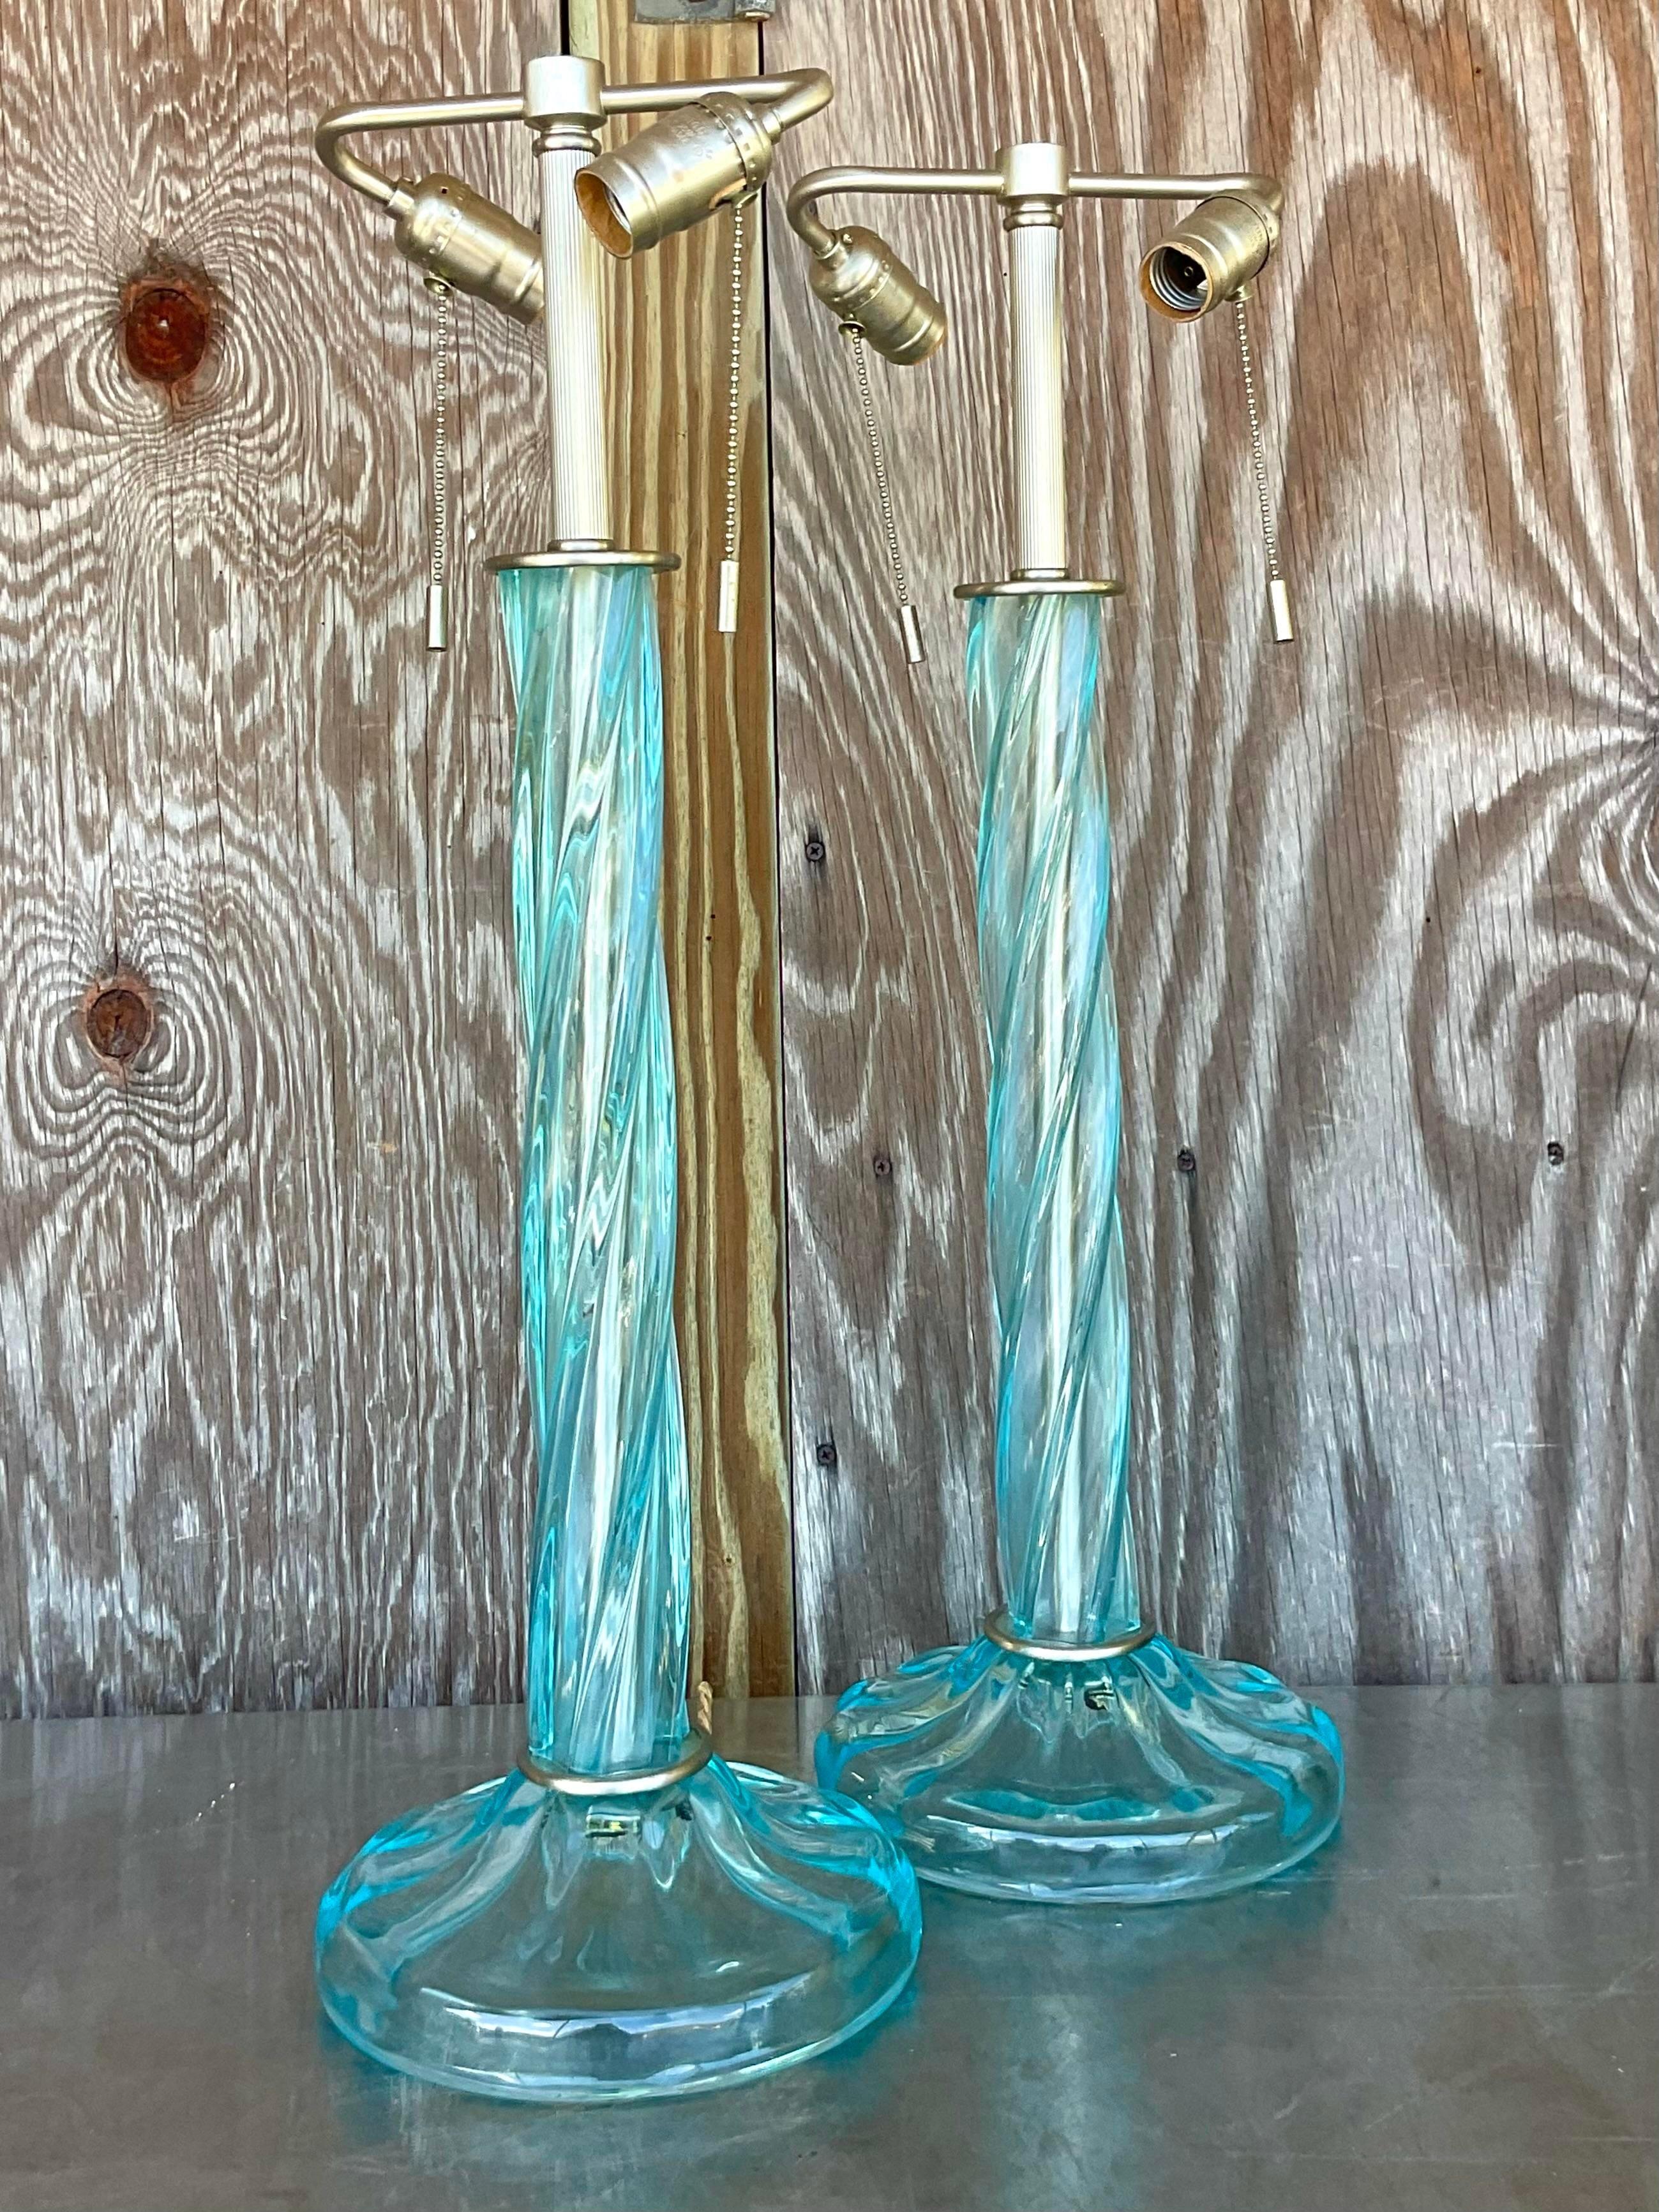 Illuminate your space with sophistication and flair using our Vintage Boho Signed Donghia Blown Twist Glass Lamps - A Pair. Handcrafted by American artisans, these exquisite lamps blend the timeless elegance of blown glass with the eclectic charm of